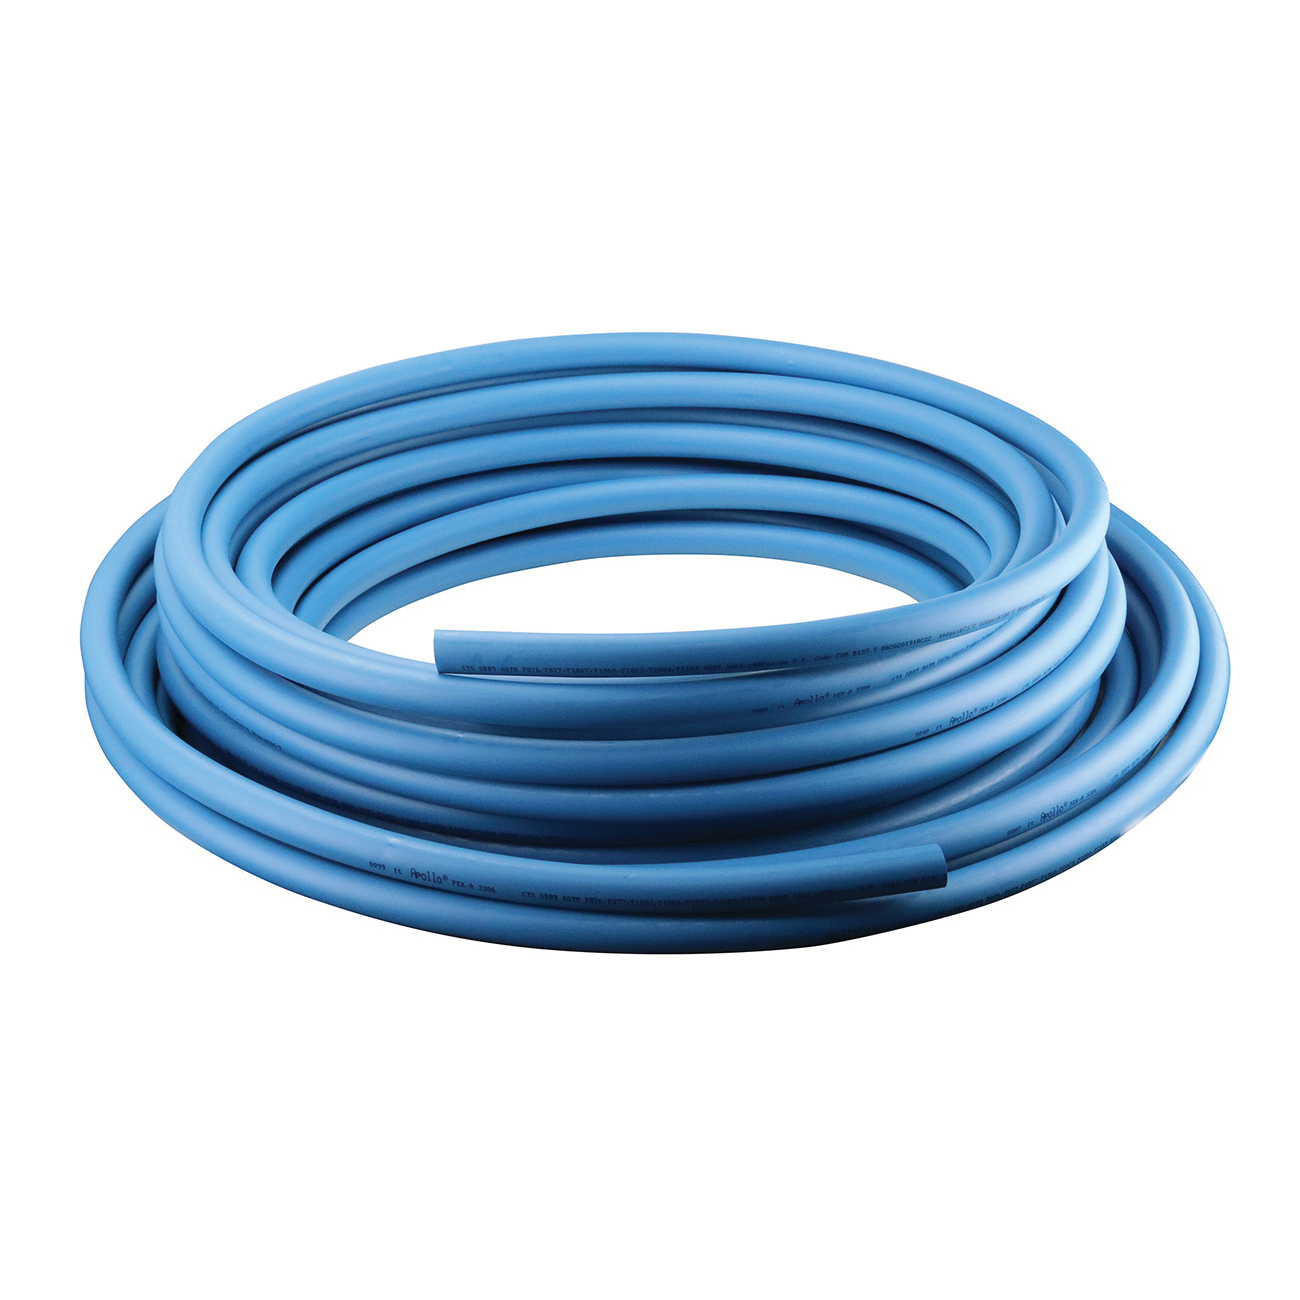 EPPB10012 PEX-A Pipe Tubing, 1/2 in, Opaque, 100 ft L